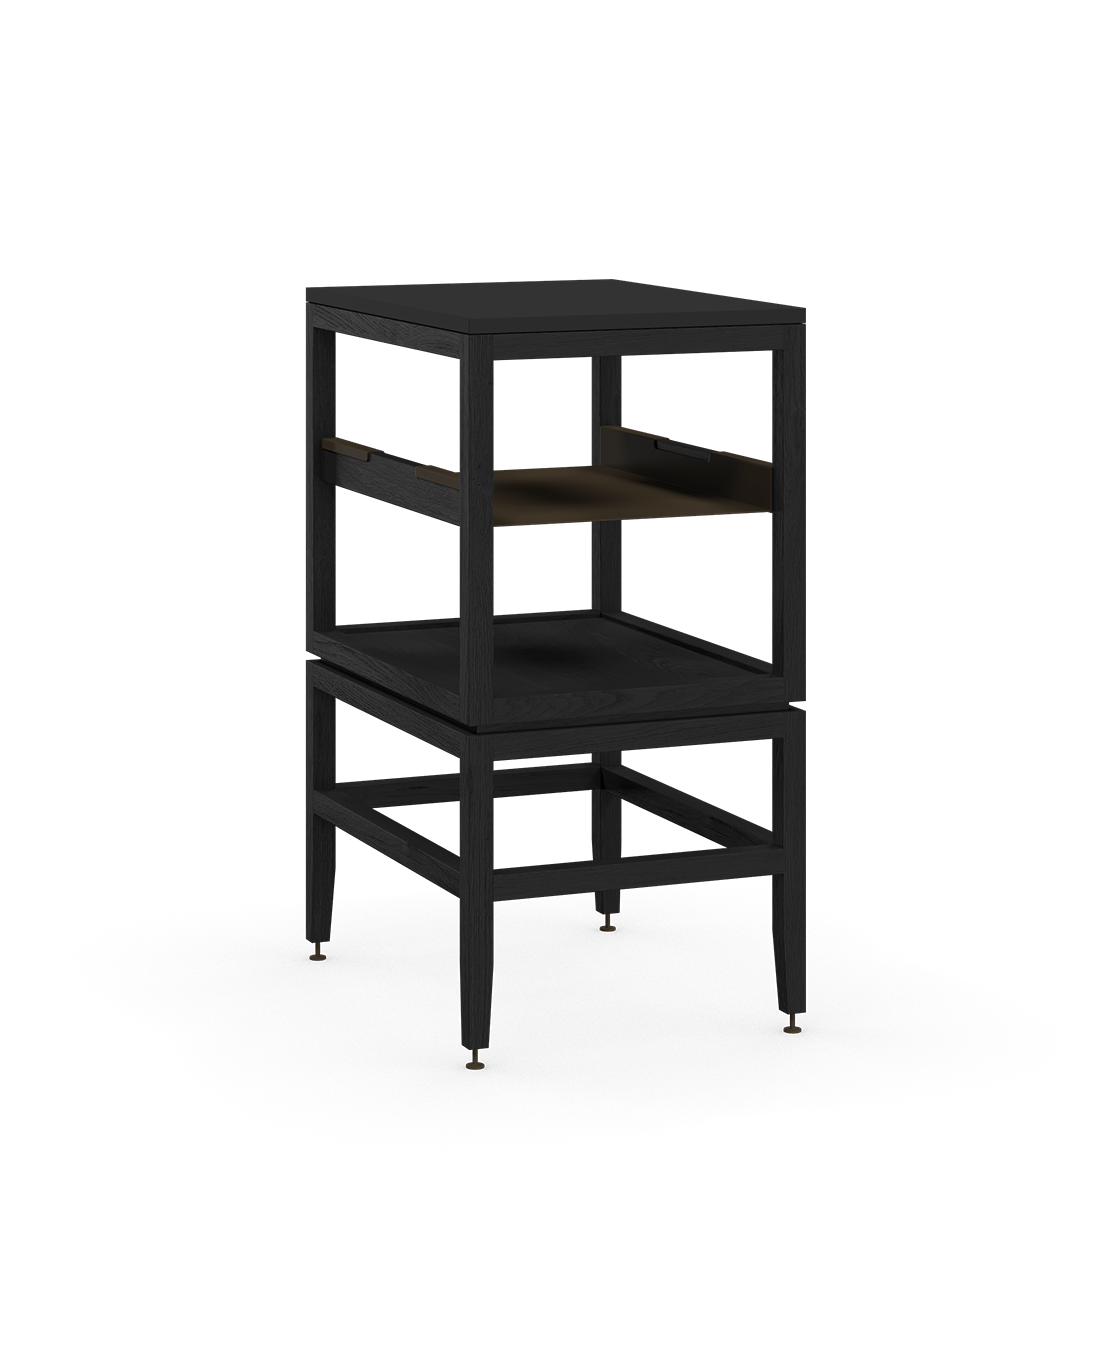 Coquo modular open kitchen cabinet in black stained oak with metal shelf. 